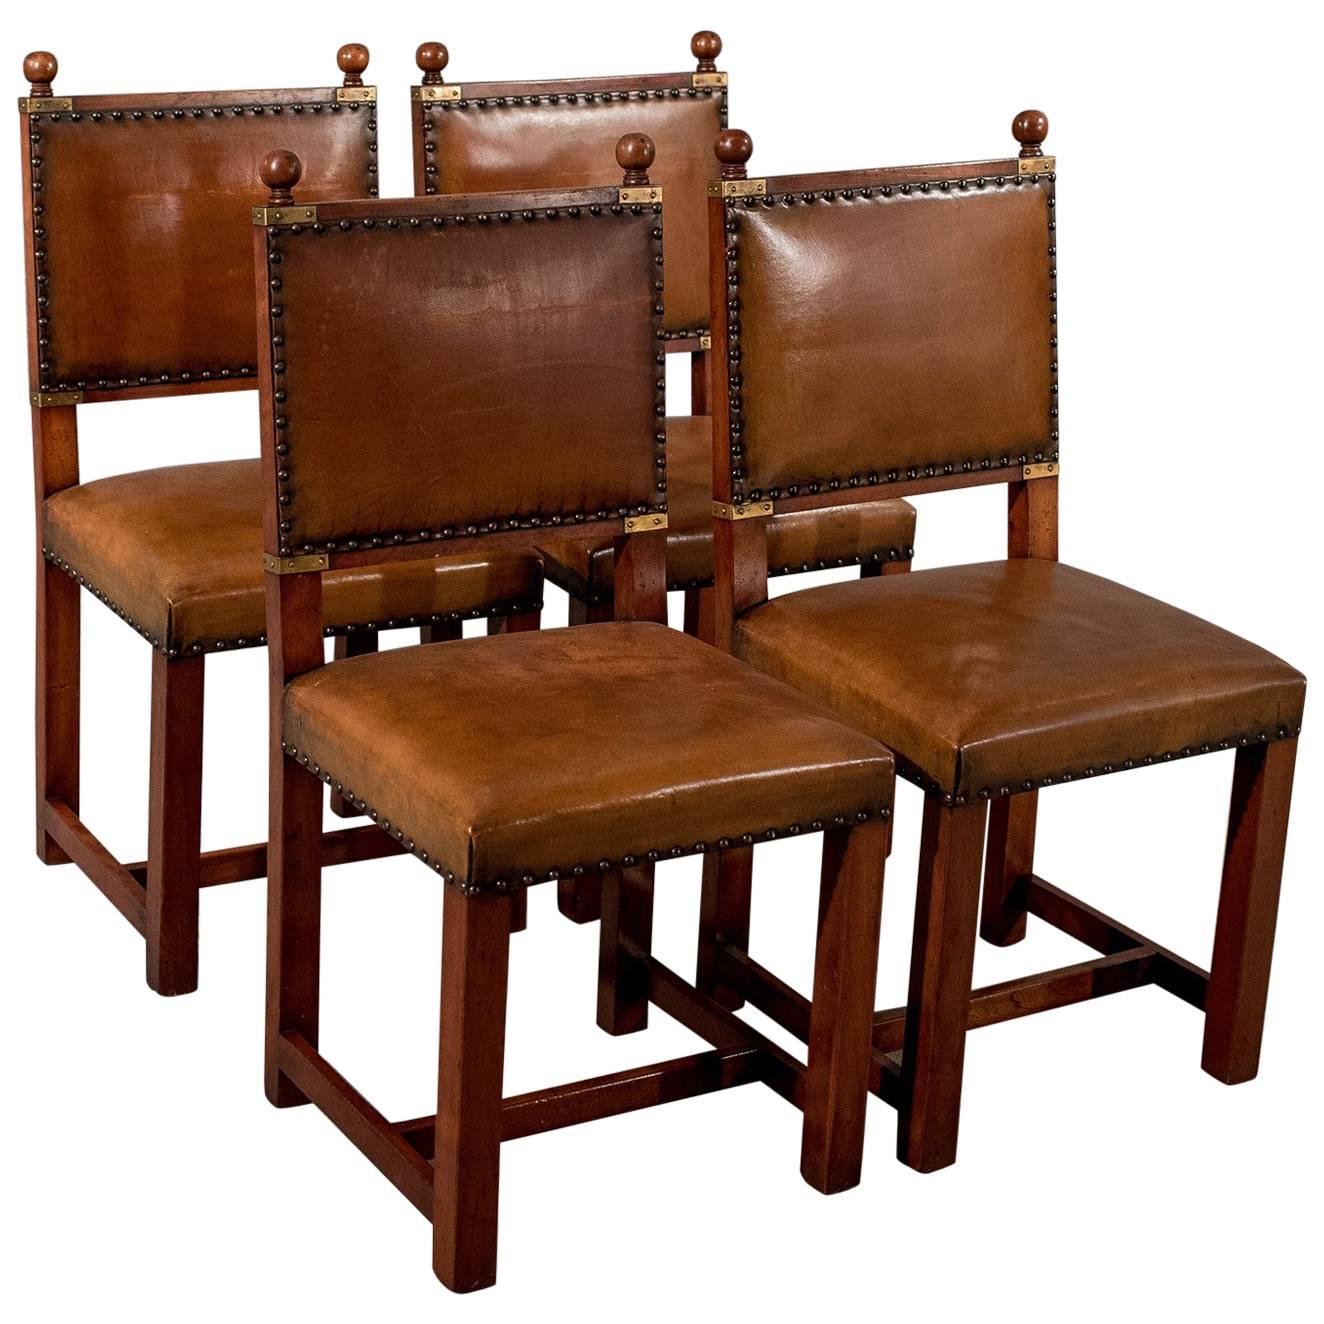 Antique Oak and Leather Set Four Dining Kitchen Chairs Comfy and Quality